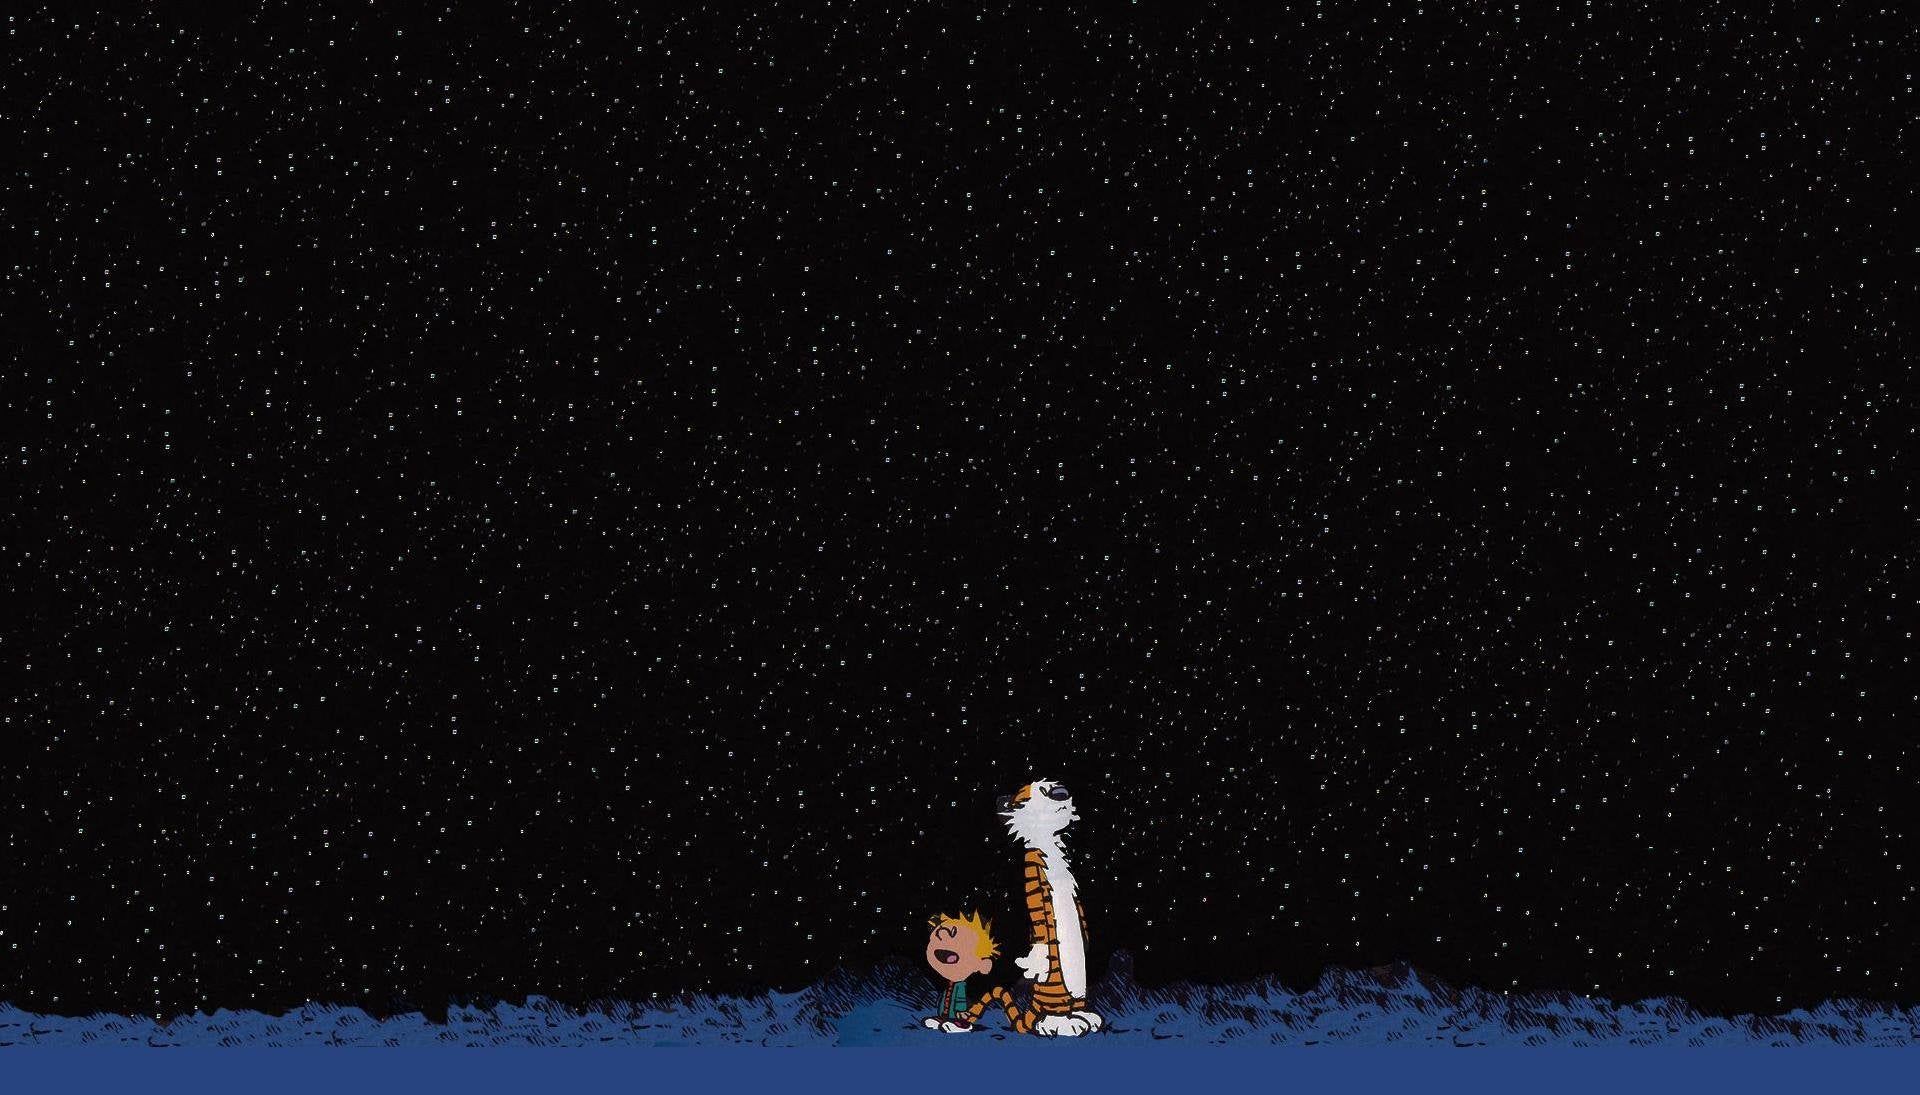 Calvin and Hobbes Wallpaper with extra on the bottom so they sit above your Windows 7 start bar nicely